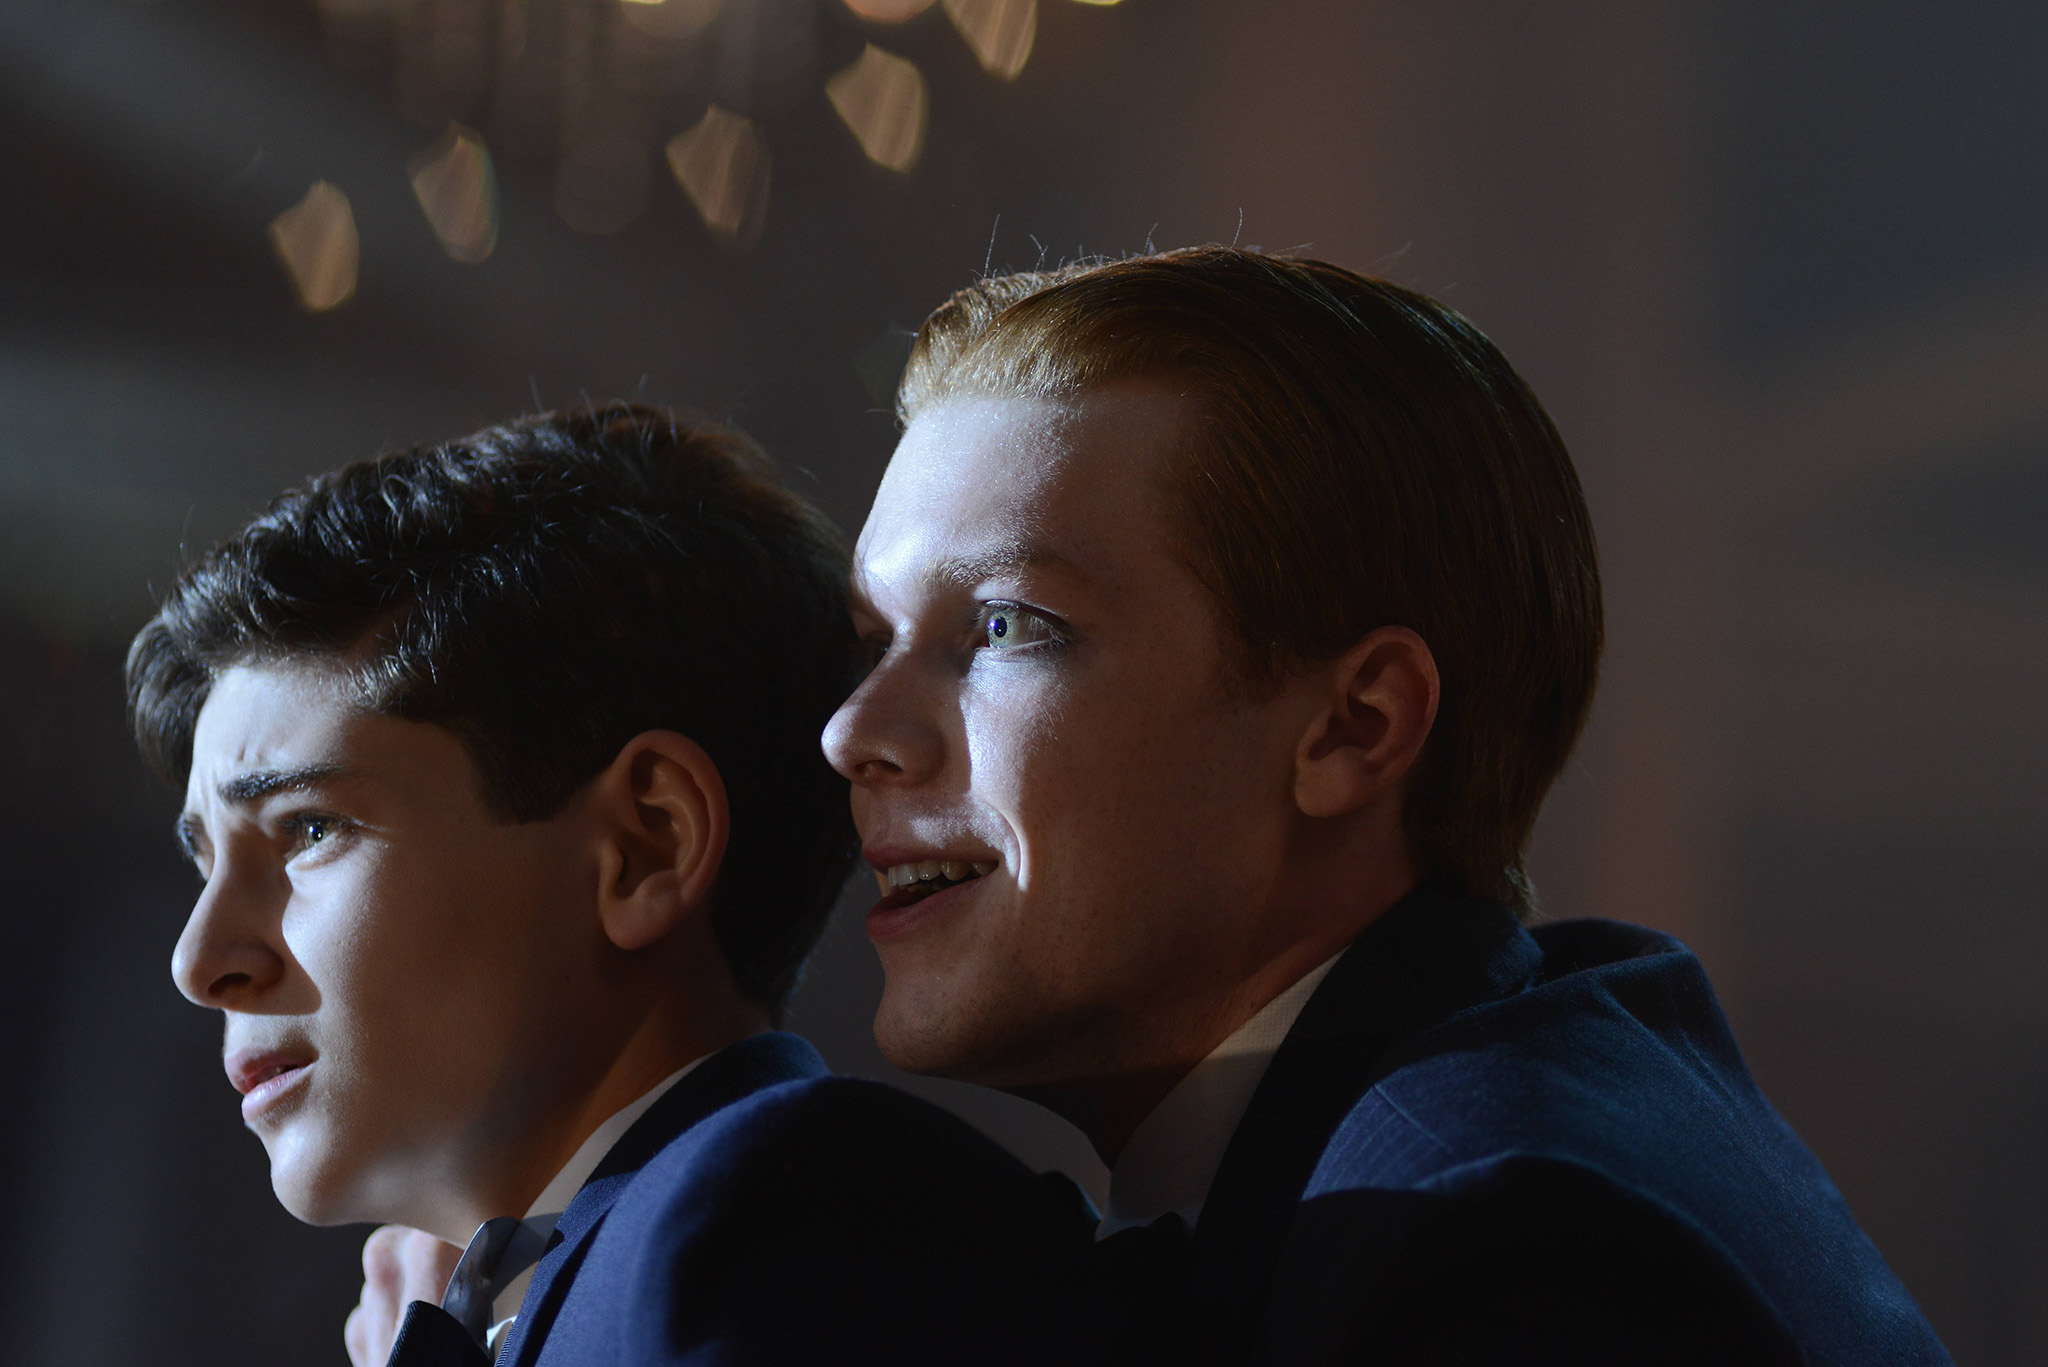 GOTHAM: (L-R) Bruce (David Mazouz) and Jerome (guest star Cameron Monaghan) in ÒRise of the Villains: The Last LaughÓ episode of GOTHAM airing Monday, Oct. 5 (8:00-9:00 PM ET/PT) on FOX. ©2015 Fox Broadcasting Co. Cr: Nicole Rivelli/FOX.